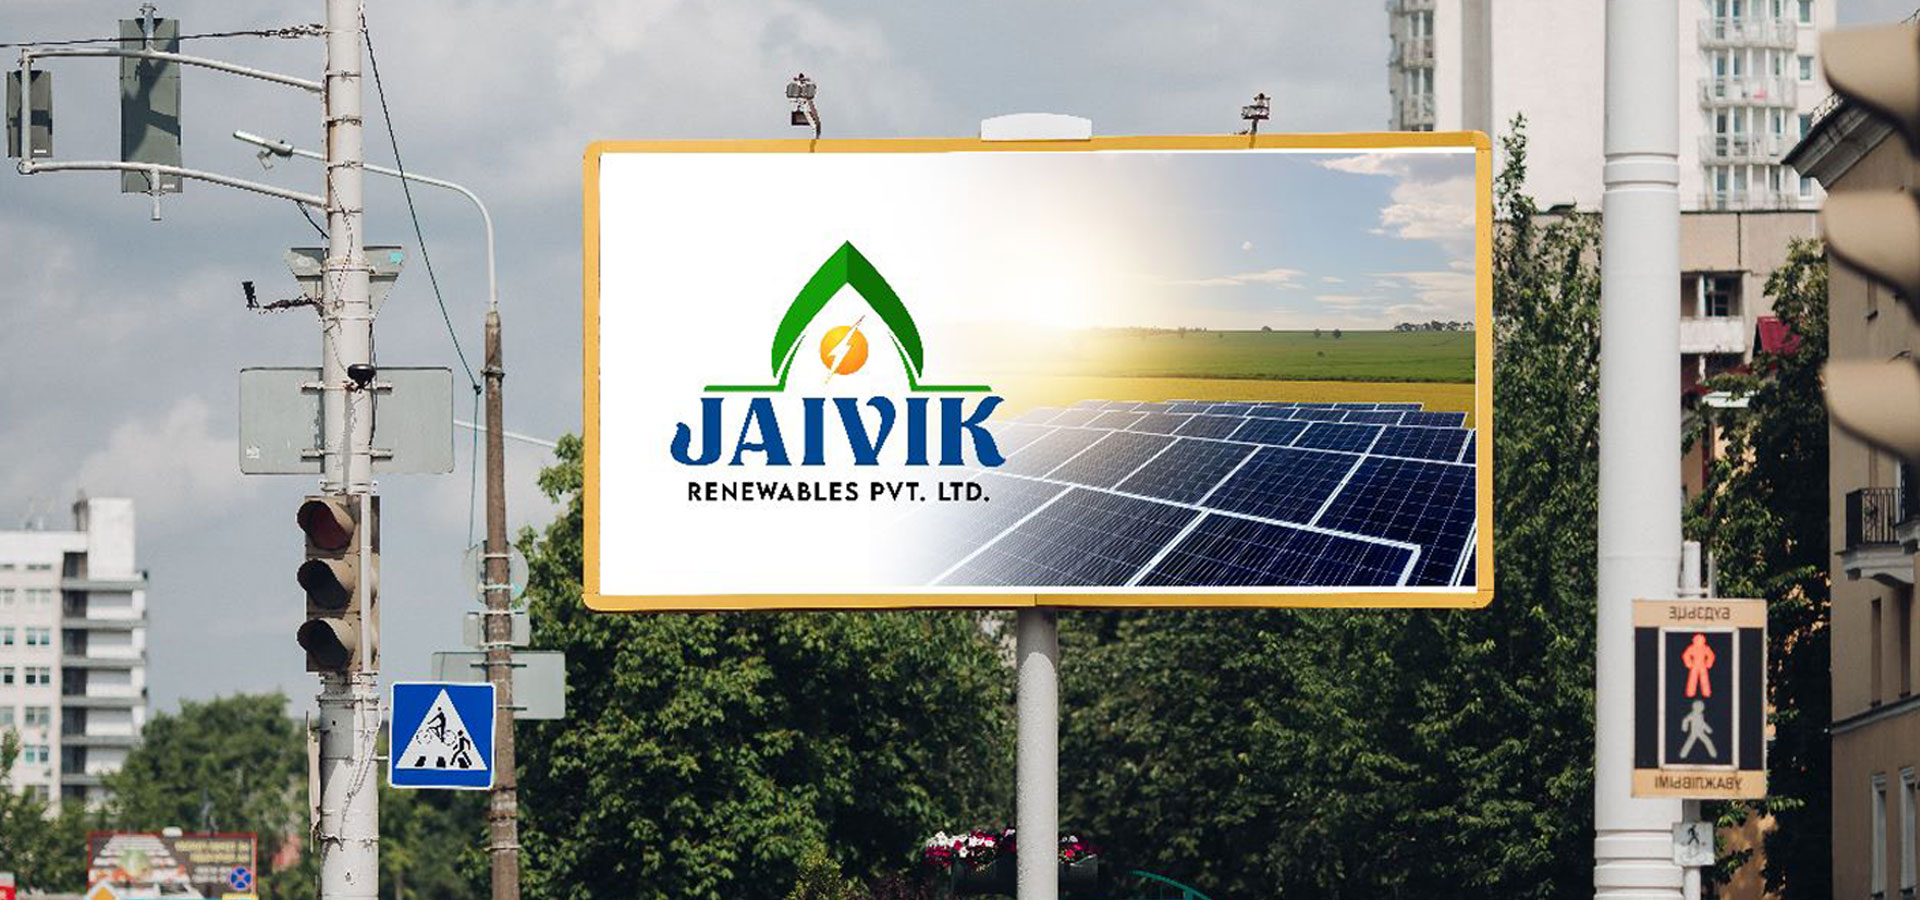 Own Your Solar Power Plant: Pay Only for Installation and Net Metering, Harness Clean Energy Independence!